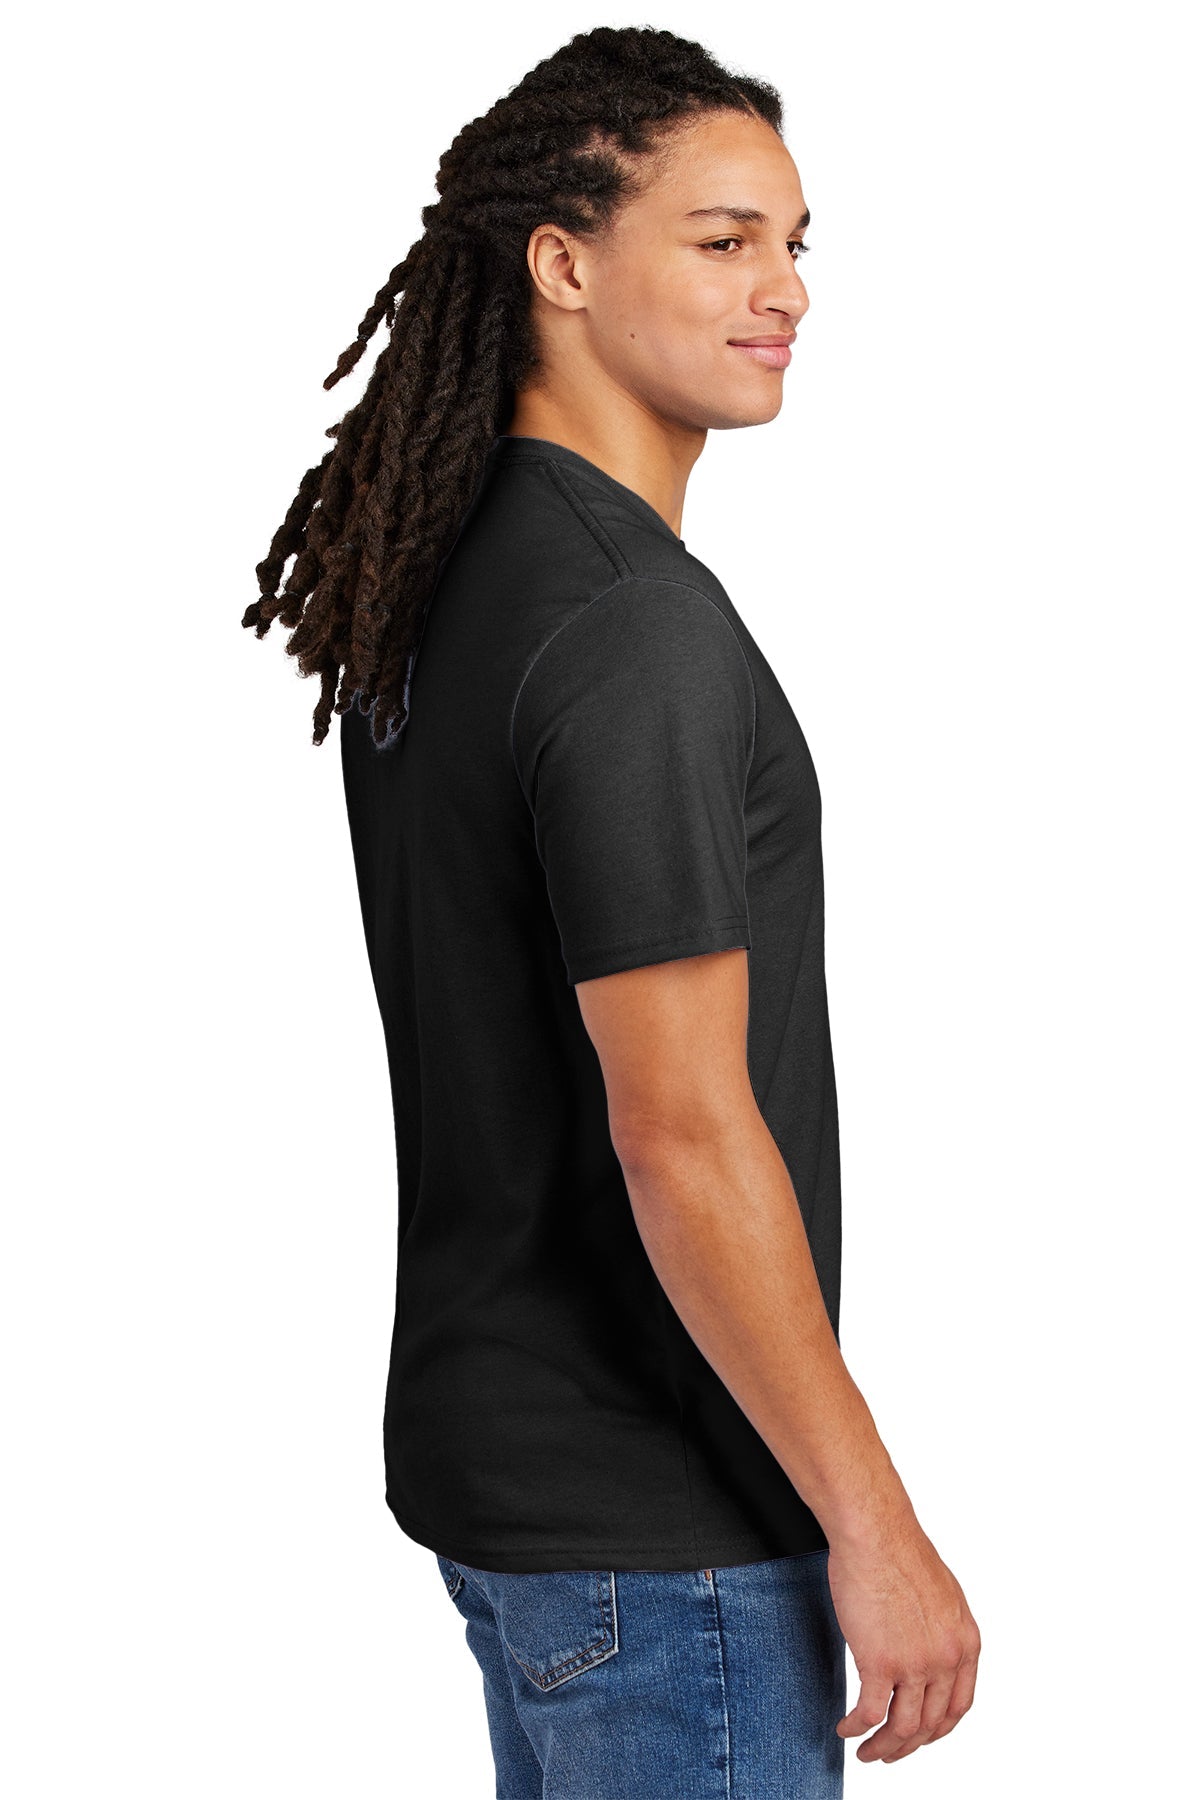 District Men's Tee, Black [GuidePoint Security]